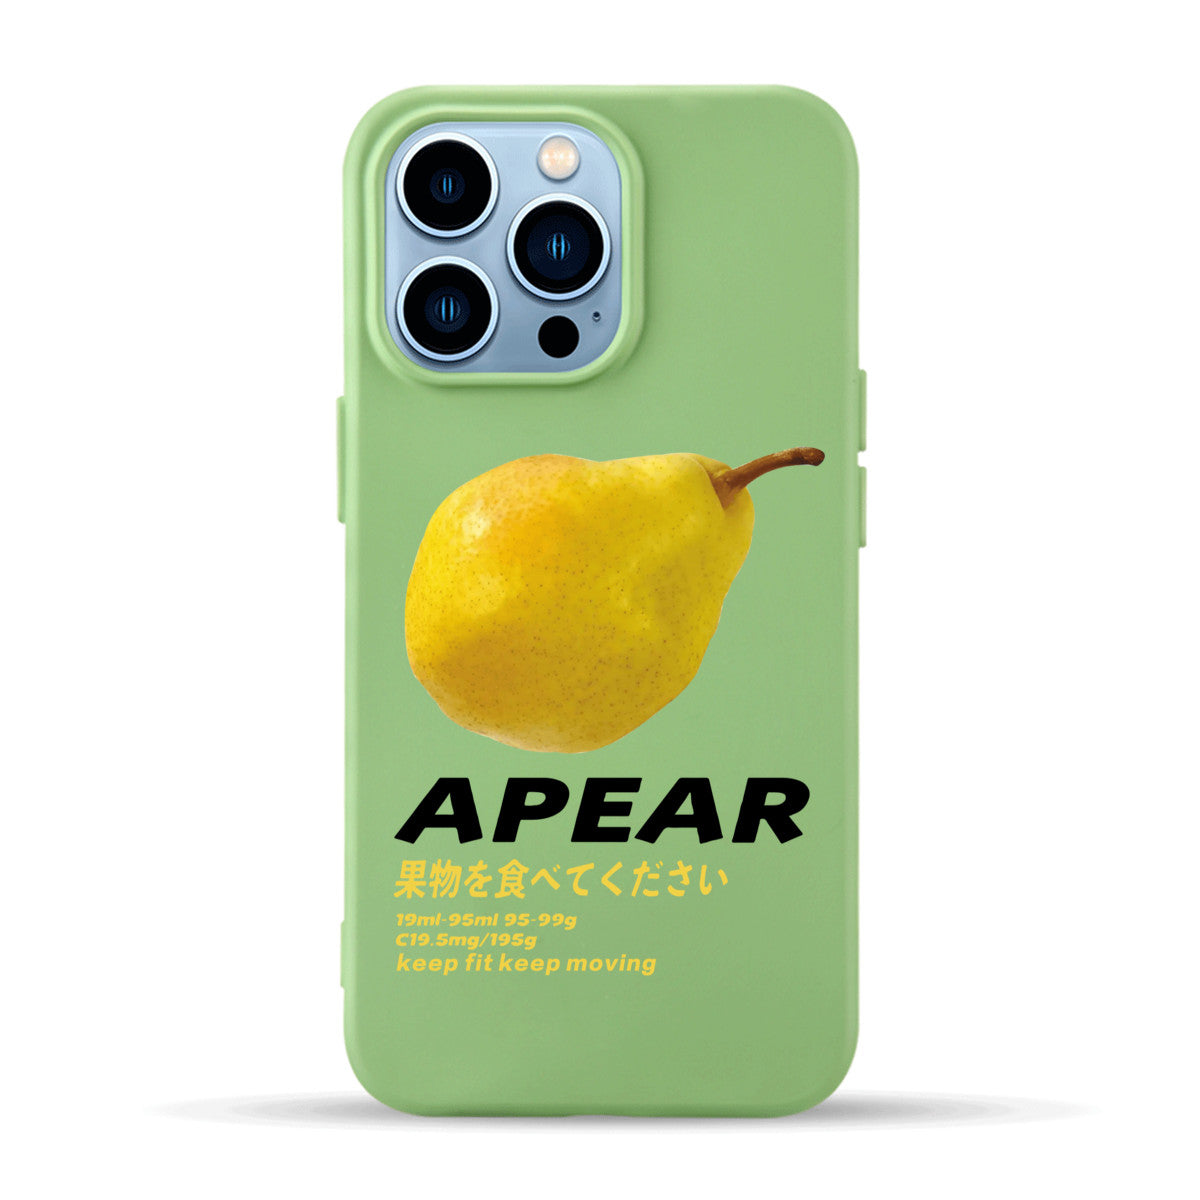 Pear - iPhone Case